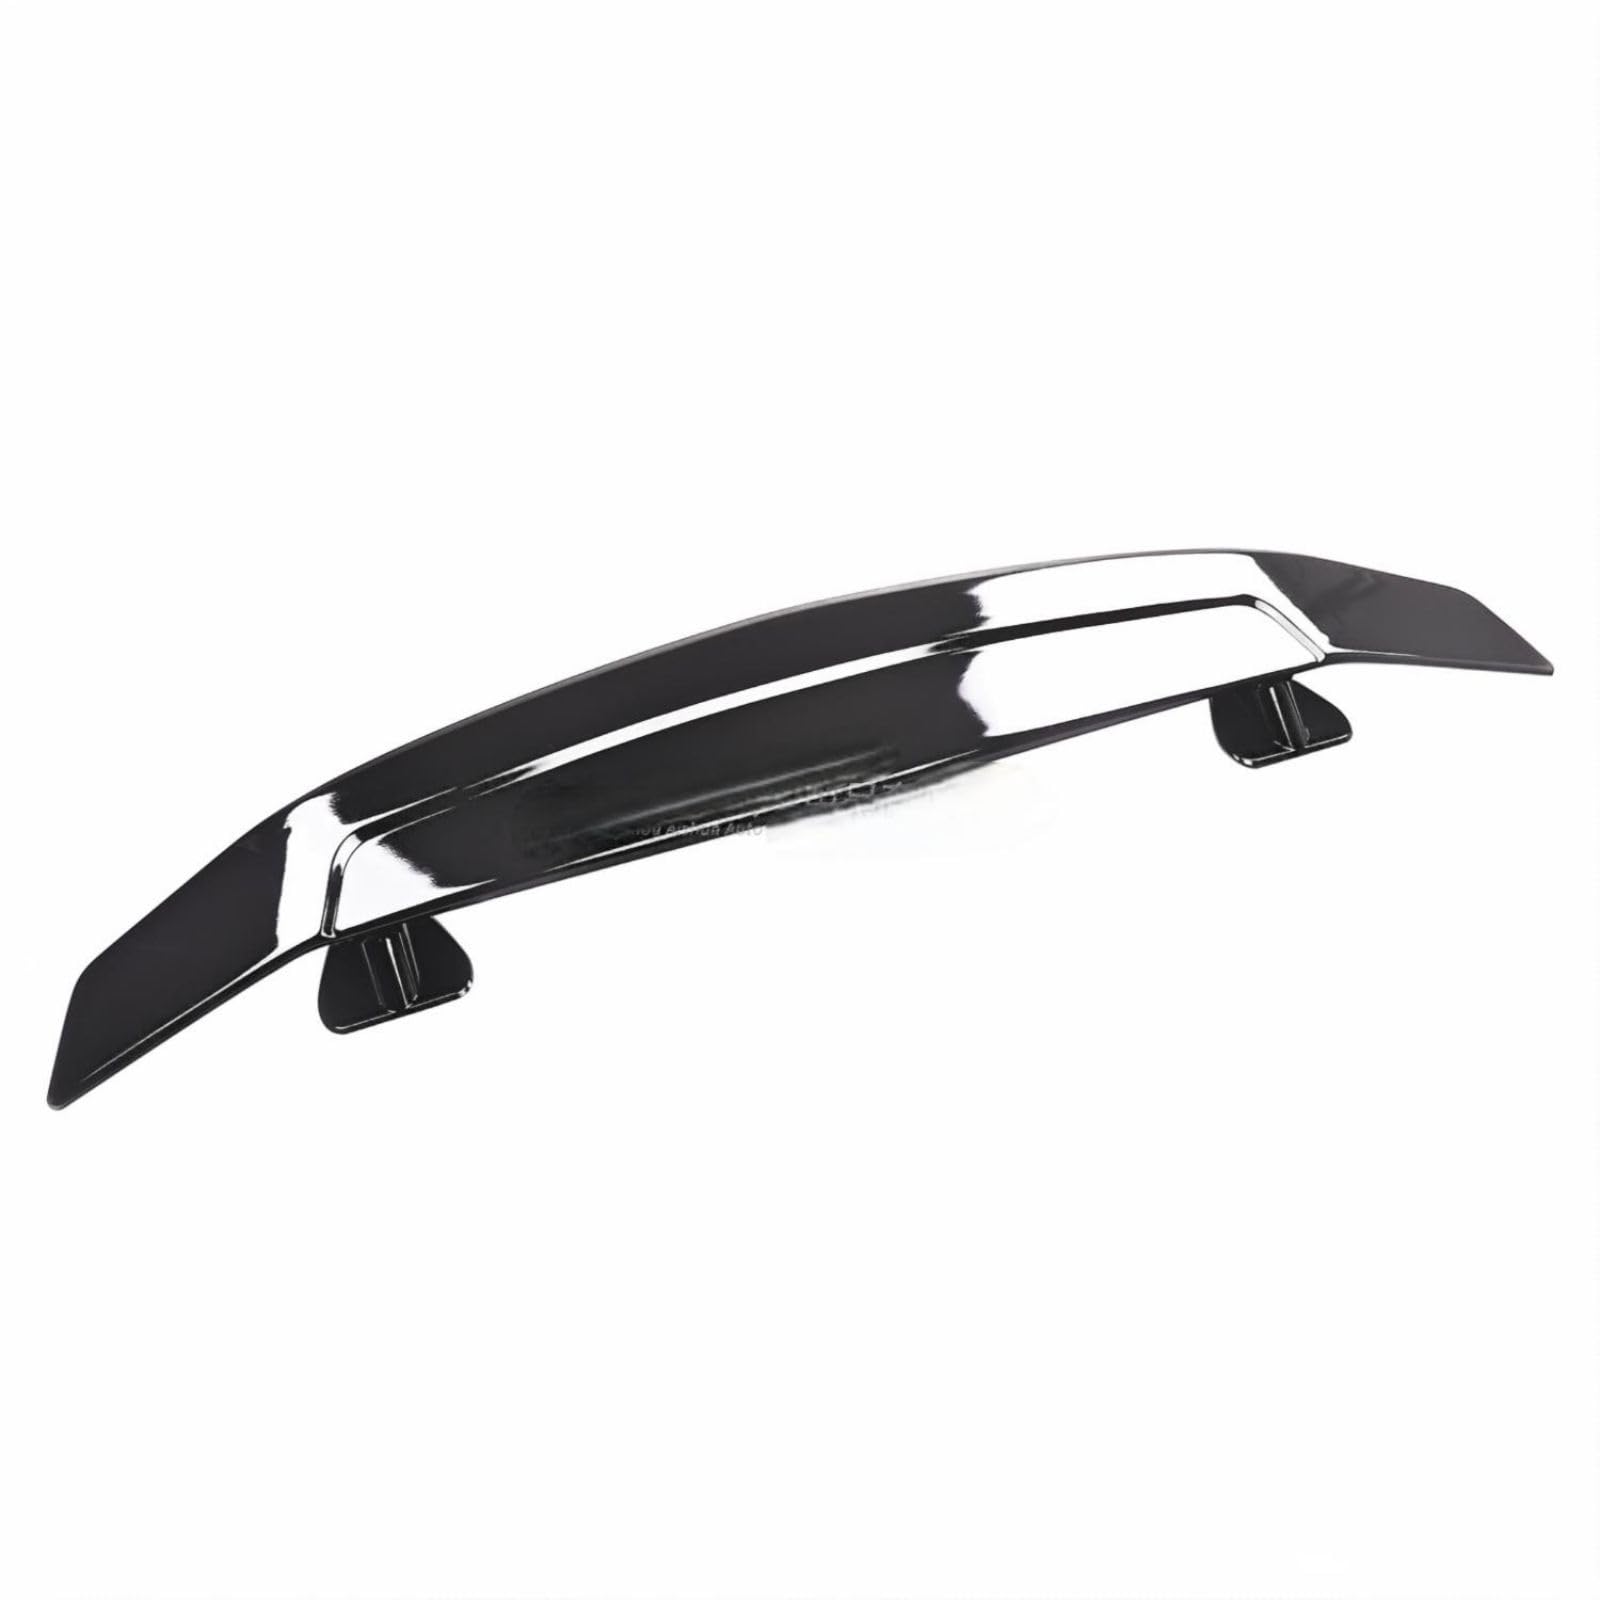 Car Rear Window Spoiler for Alpina B6 Coupe (F13) 2012-2015, without Perforation Lid Spoiler Wings Installation Rear Wing Decoration,Bright Black von EESWCSZZ3